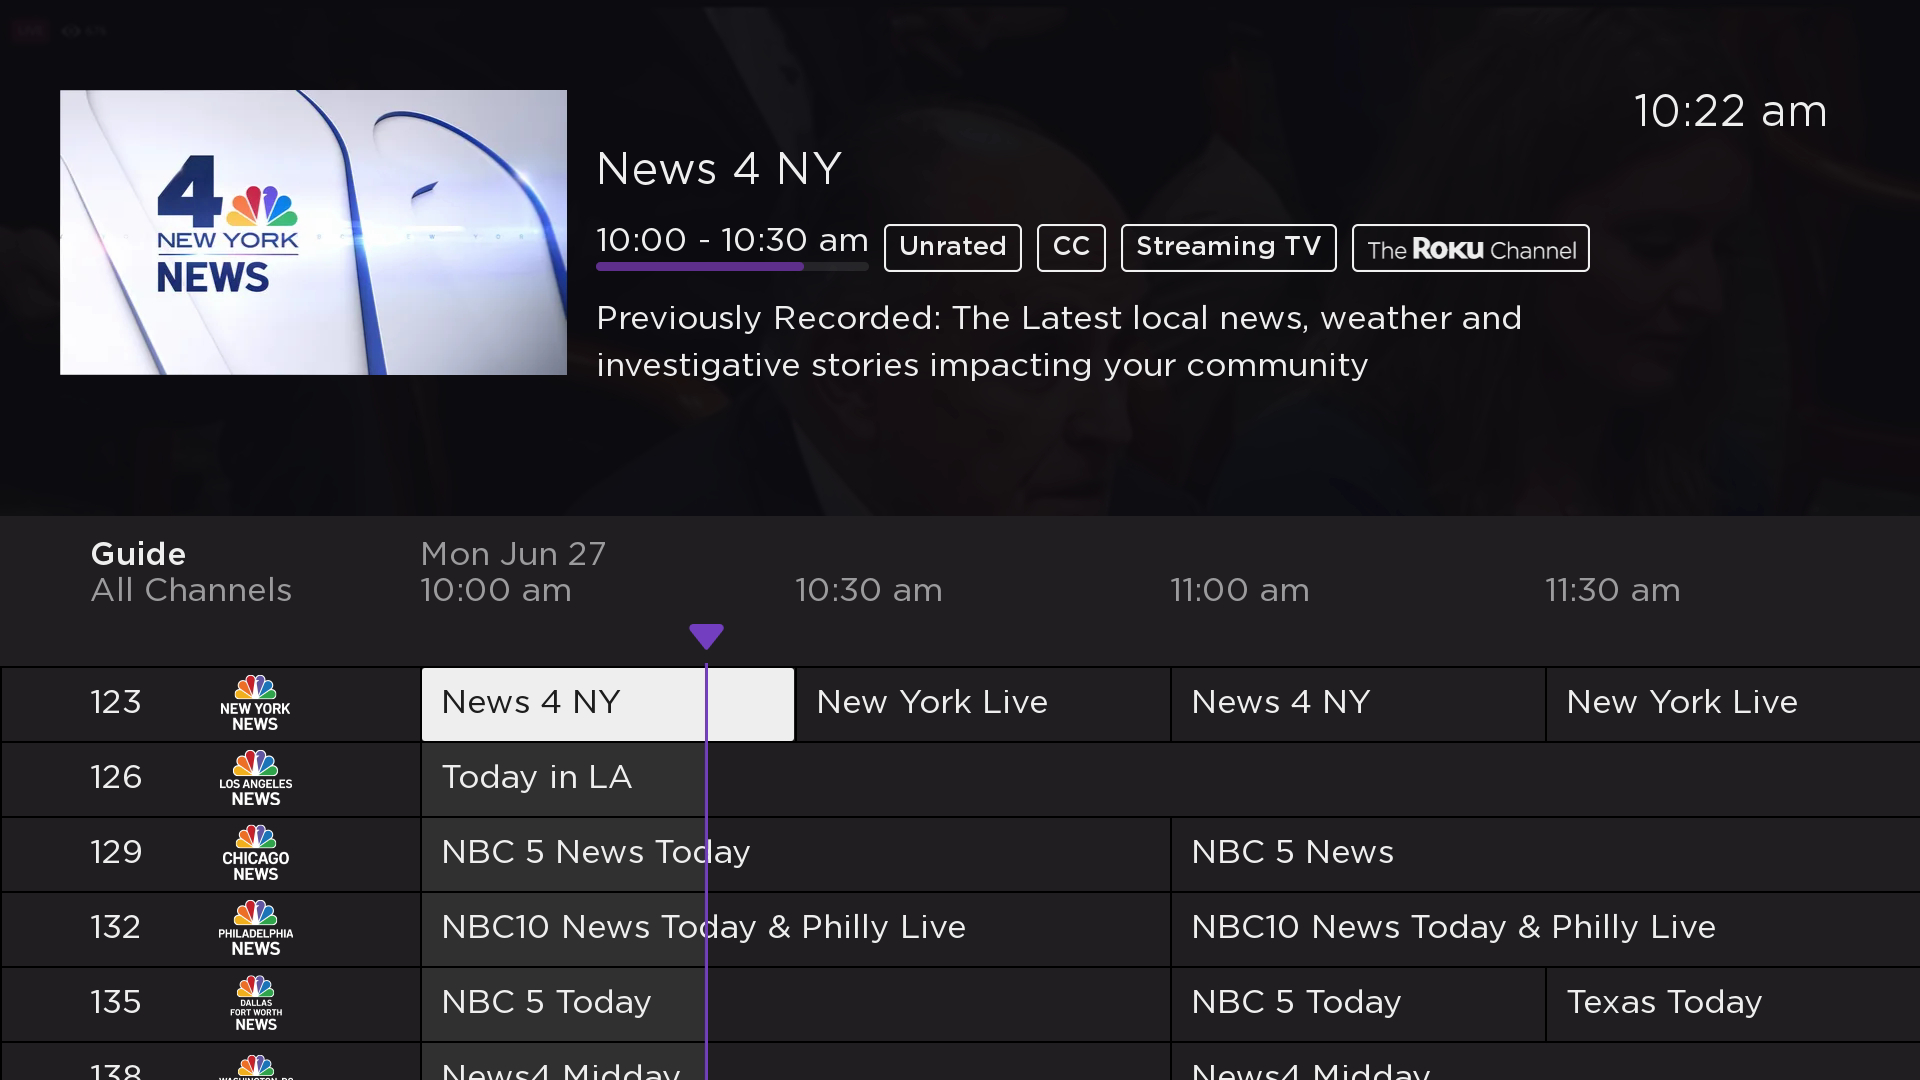 The Roku Channel Comes Together with NBCUniversal Local to Bring Local News Programming to Streamers Business Wire